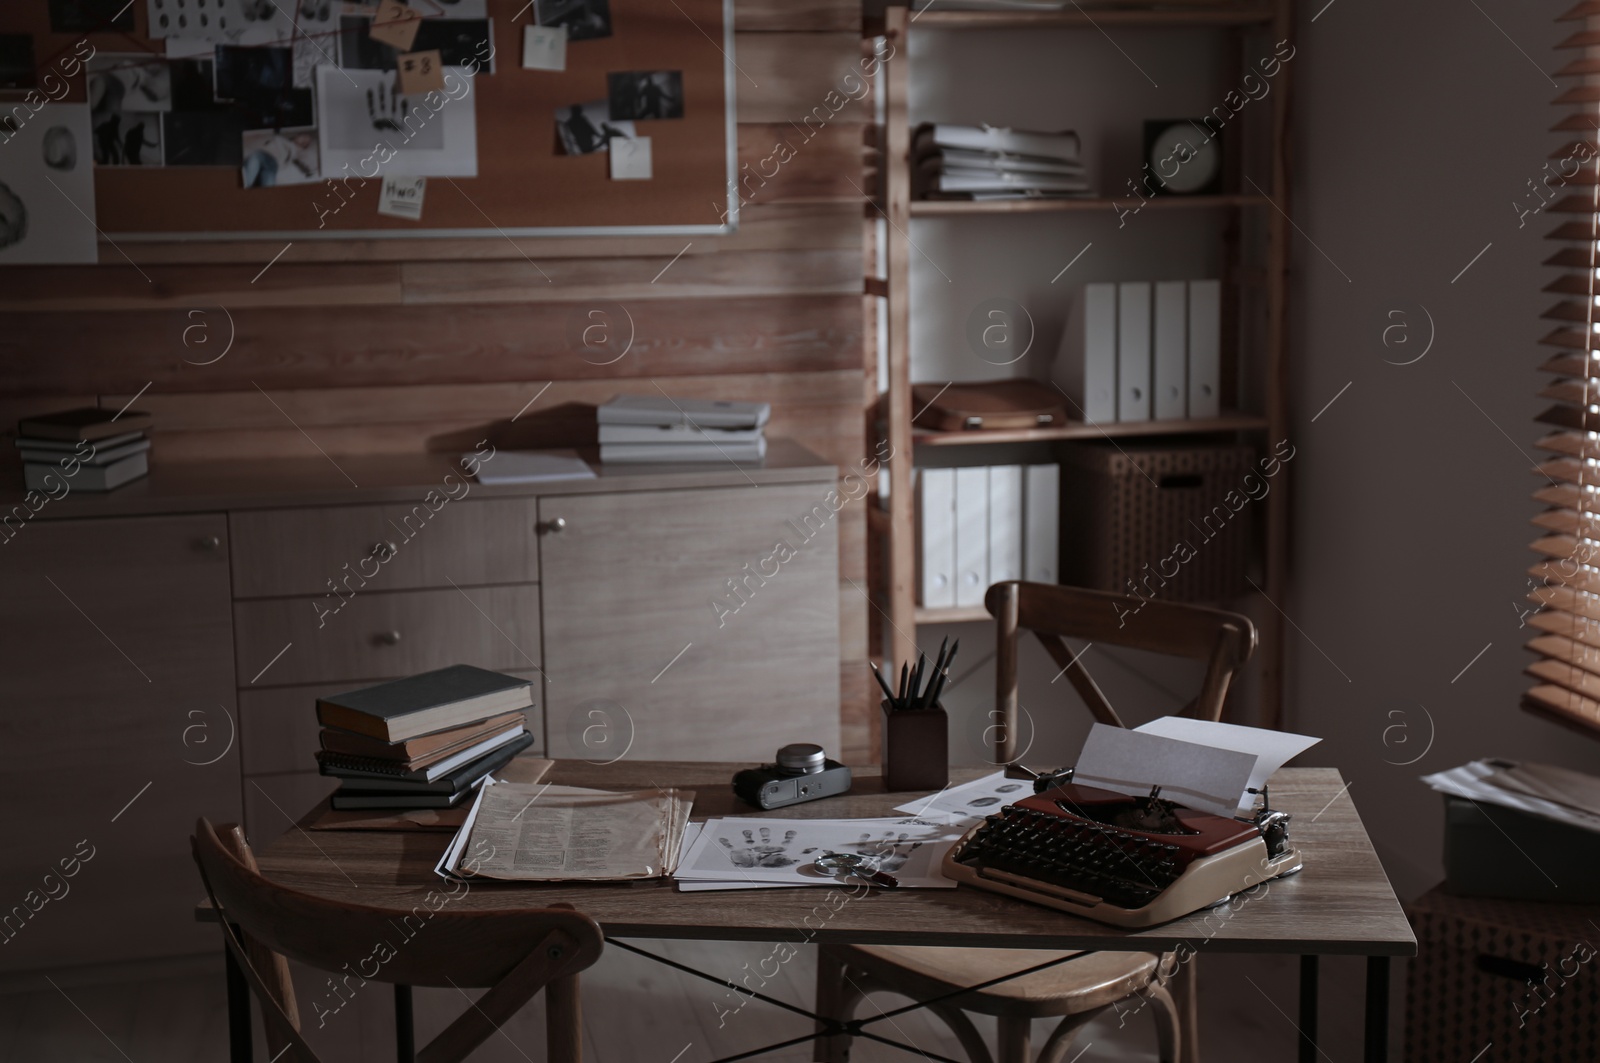 Photo of Detective's office interior with wooden desk and evidence board